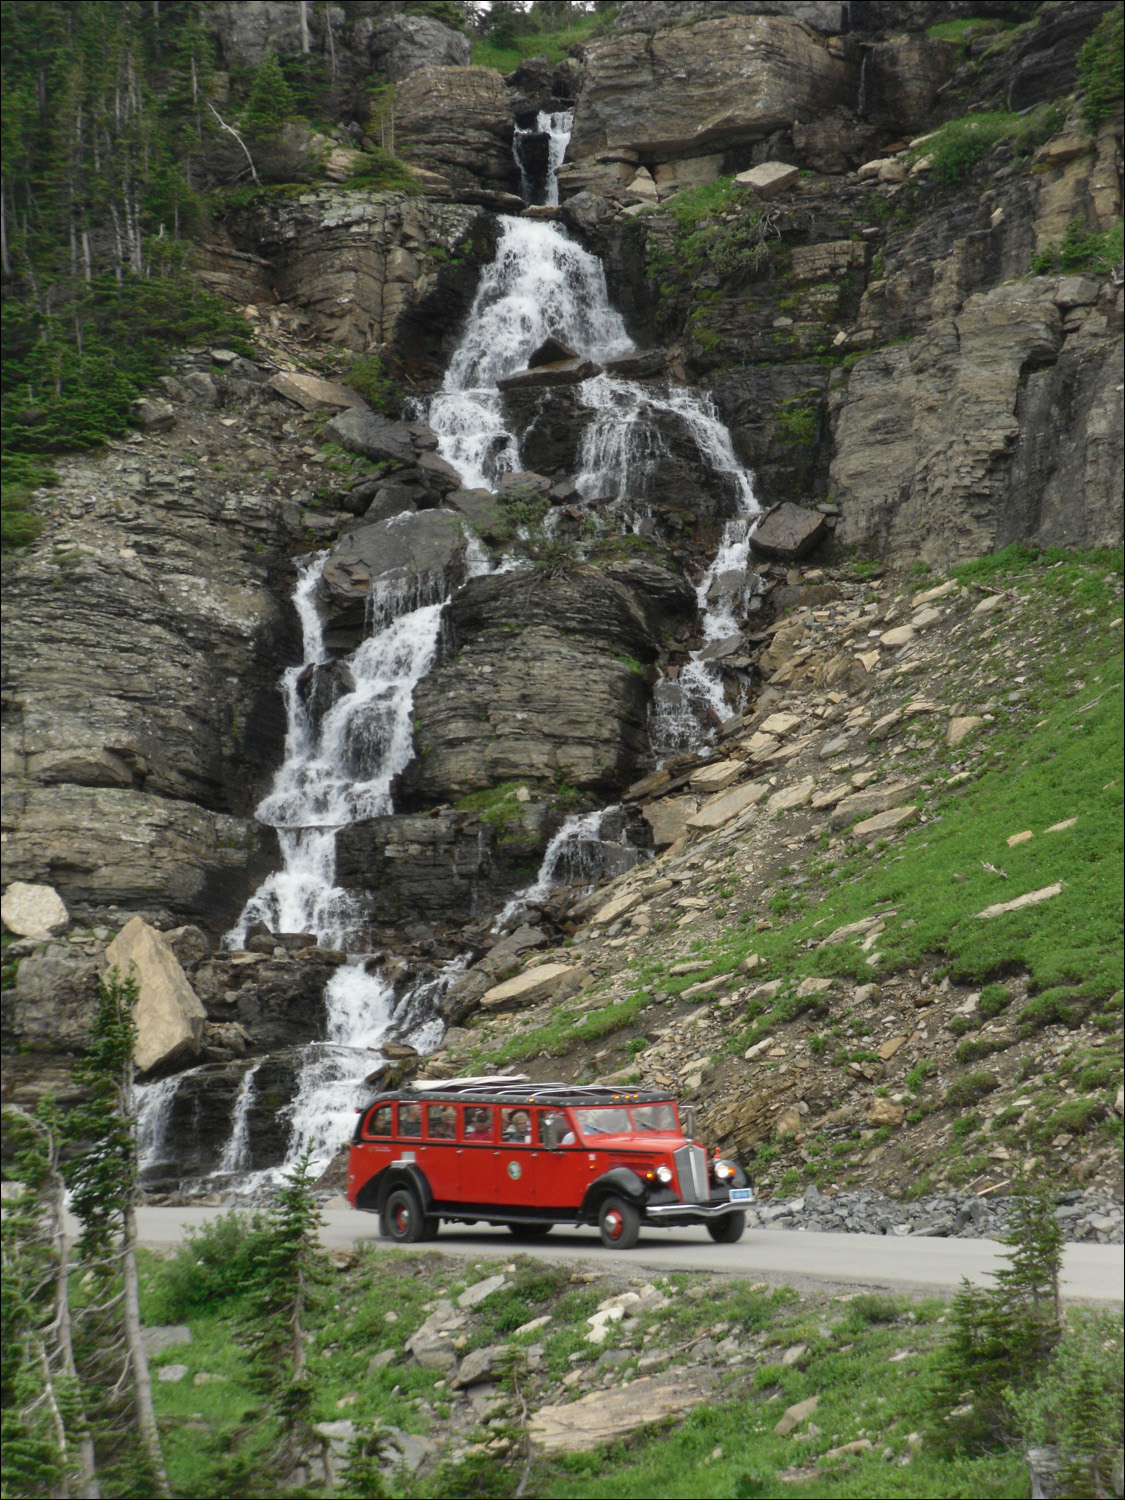 Glacier National Park-Views from west of Logans Pass on Going to the Sun Road.  Vintage GNP touring car